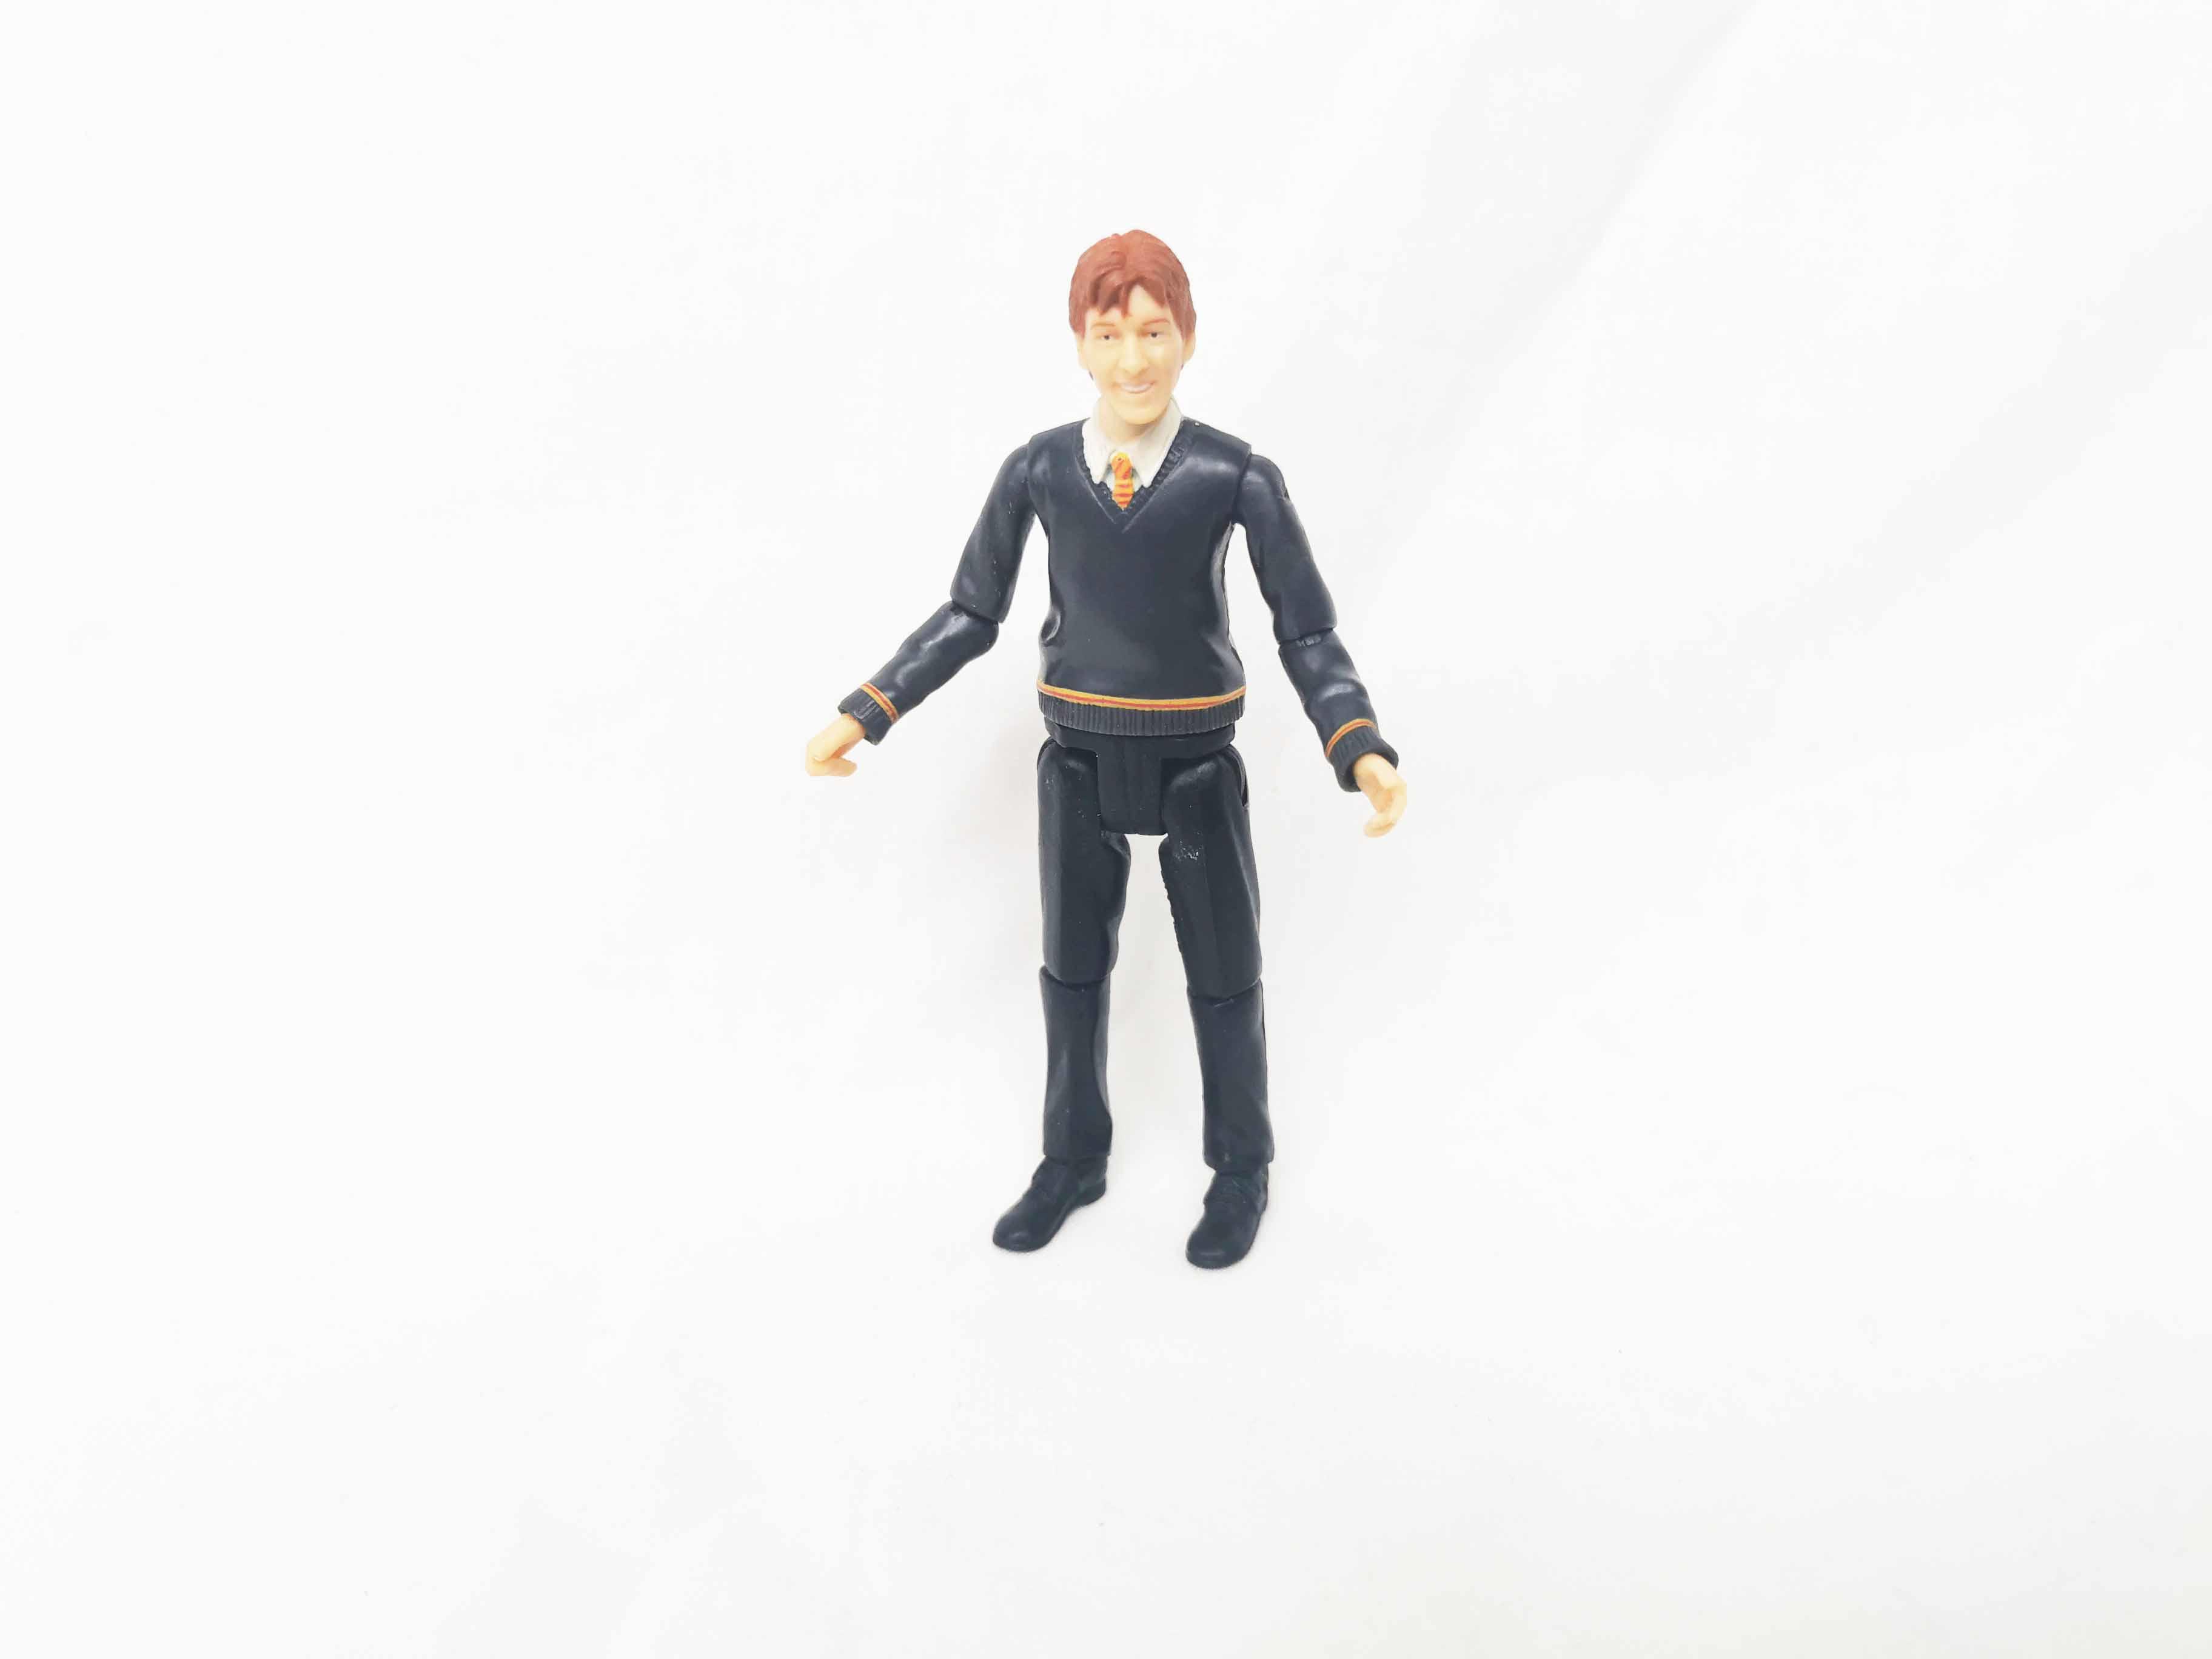 George Weasley The Weasley Twins Action Figure Harry Potter 3.75 inch